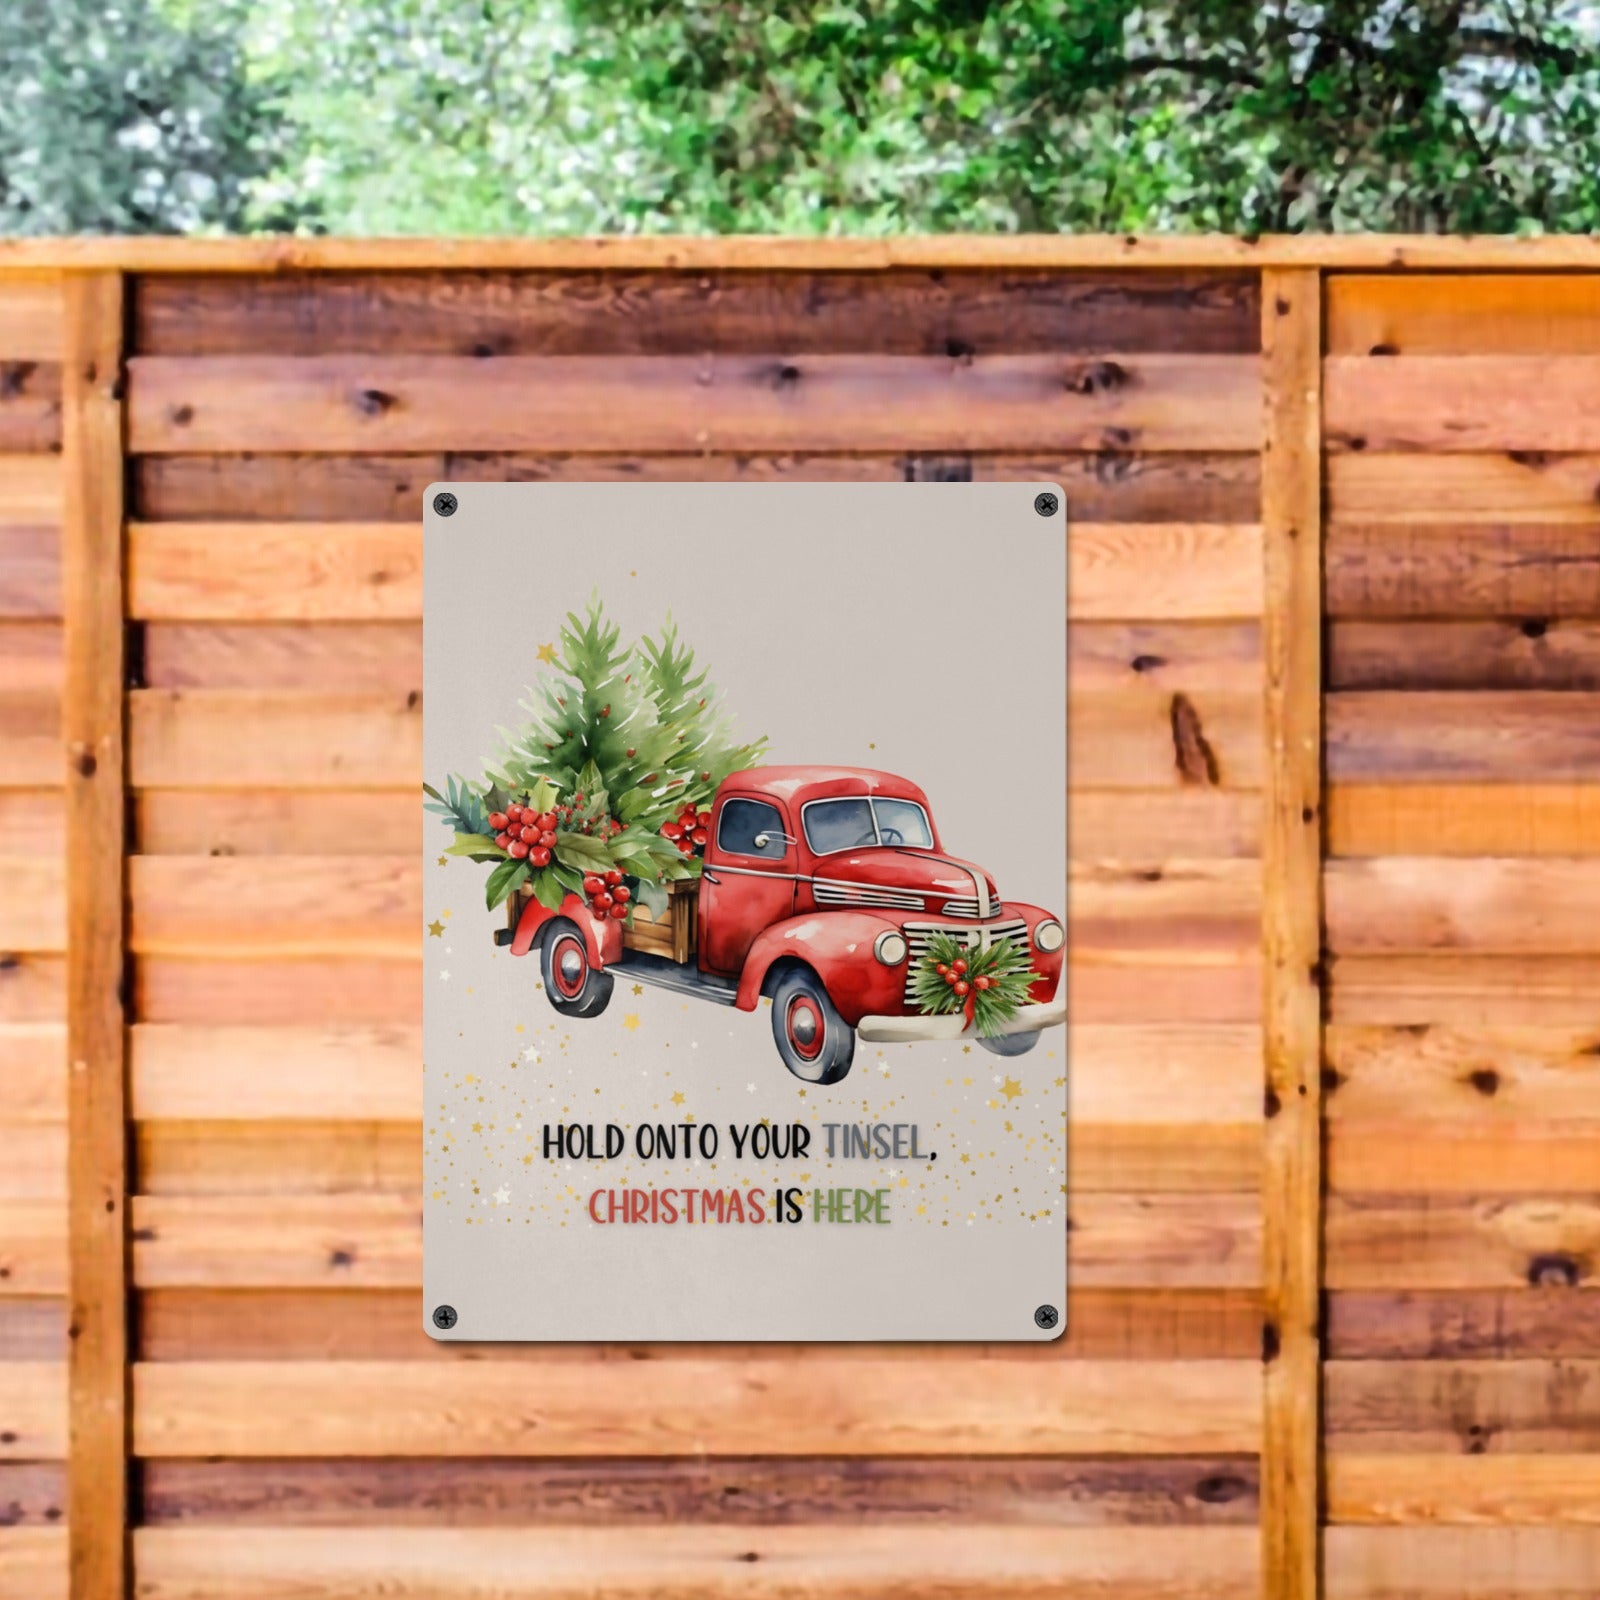 Cranberry Lake Designs "Hold onto Your Tinsel, Christmas is Here!" Red Truck Metal Sign - 12x16" Indoor/Outdoor Holiday Decor